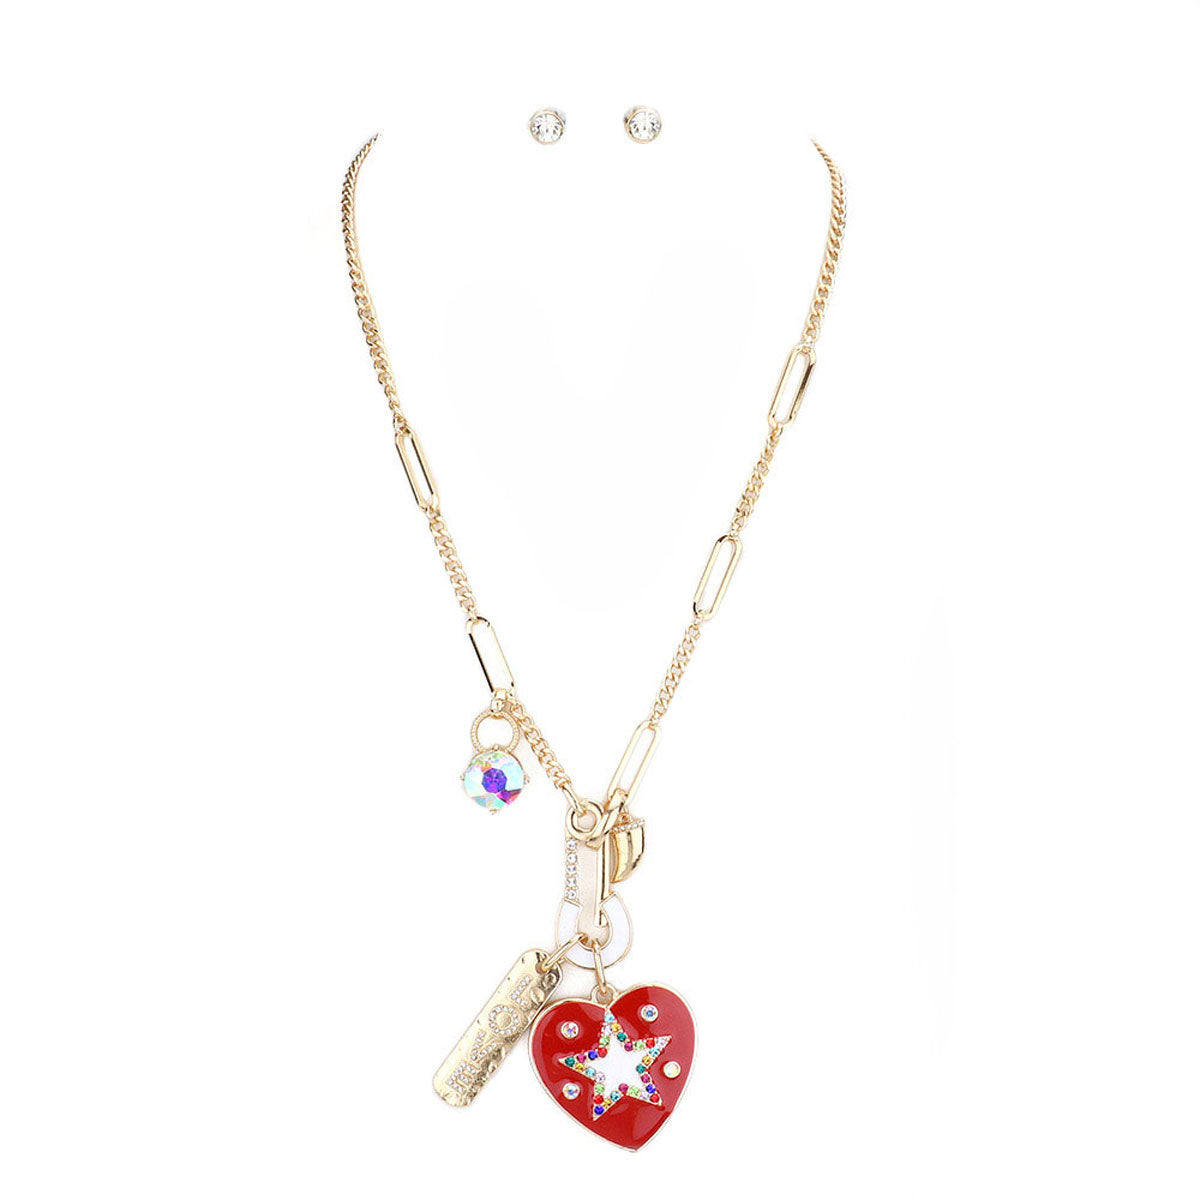 Multi Rhinestone Embellished Safety Pin Love Star Centered Enamel Heart Pendant Necklace, Get ready with these Pendant Necklace, put on a pop of color to complete your ensemble. Perfect for adding just the right amount of shimmer & shine . Perfect Birthday Gift, Valentine's Gift, Anniversary Gift, Mother's Day Gift.